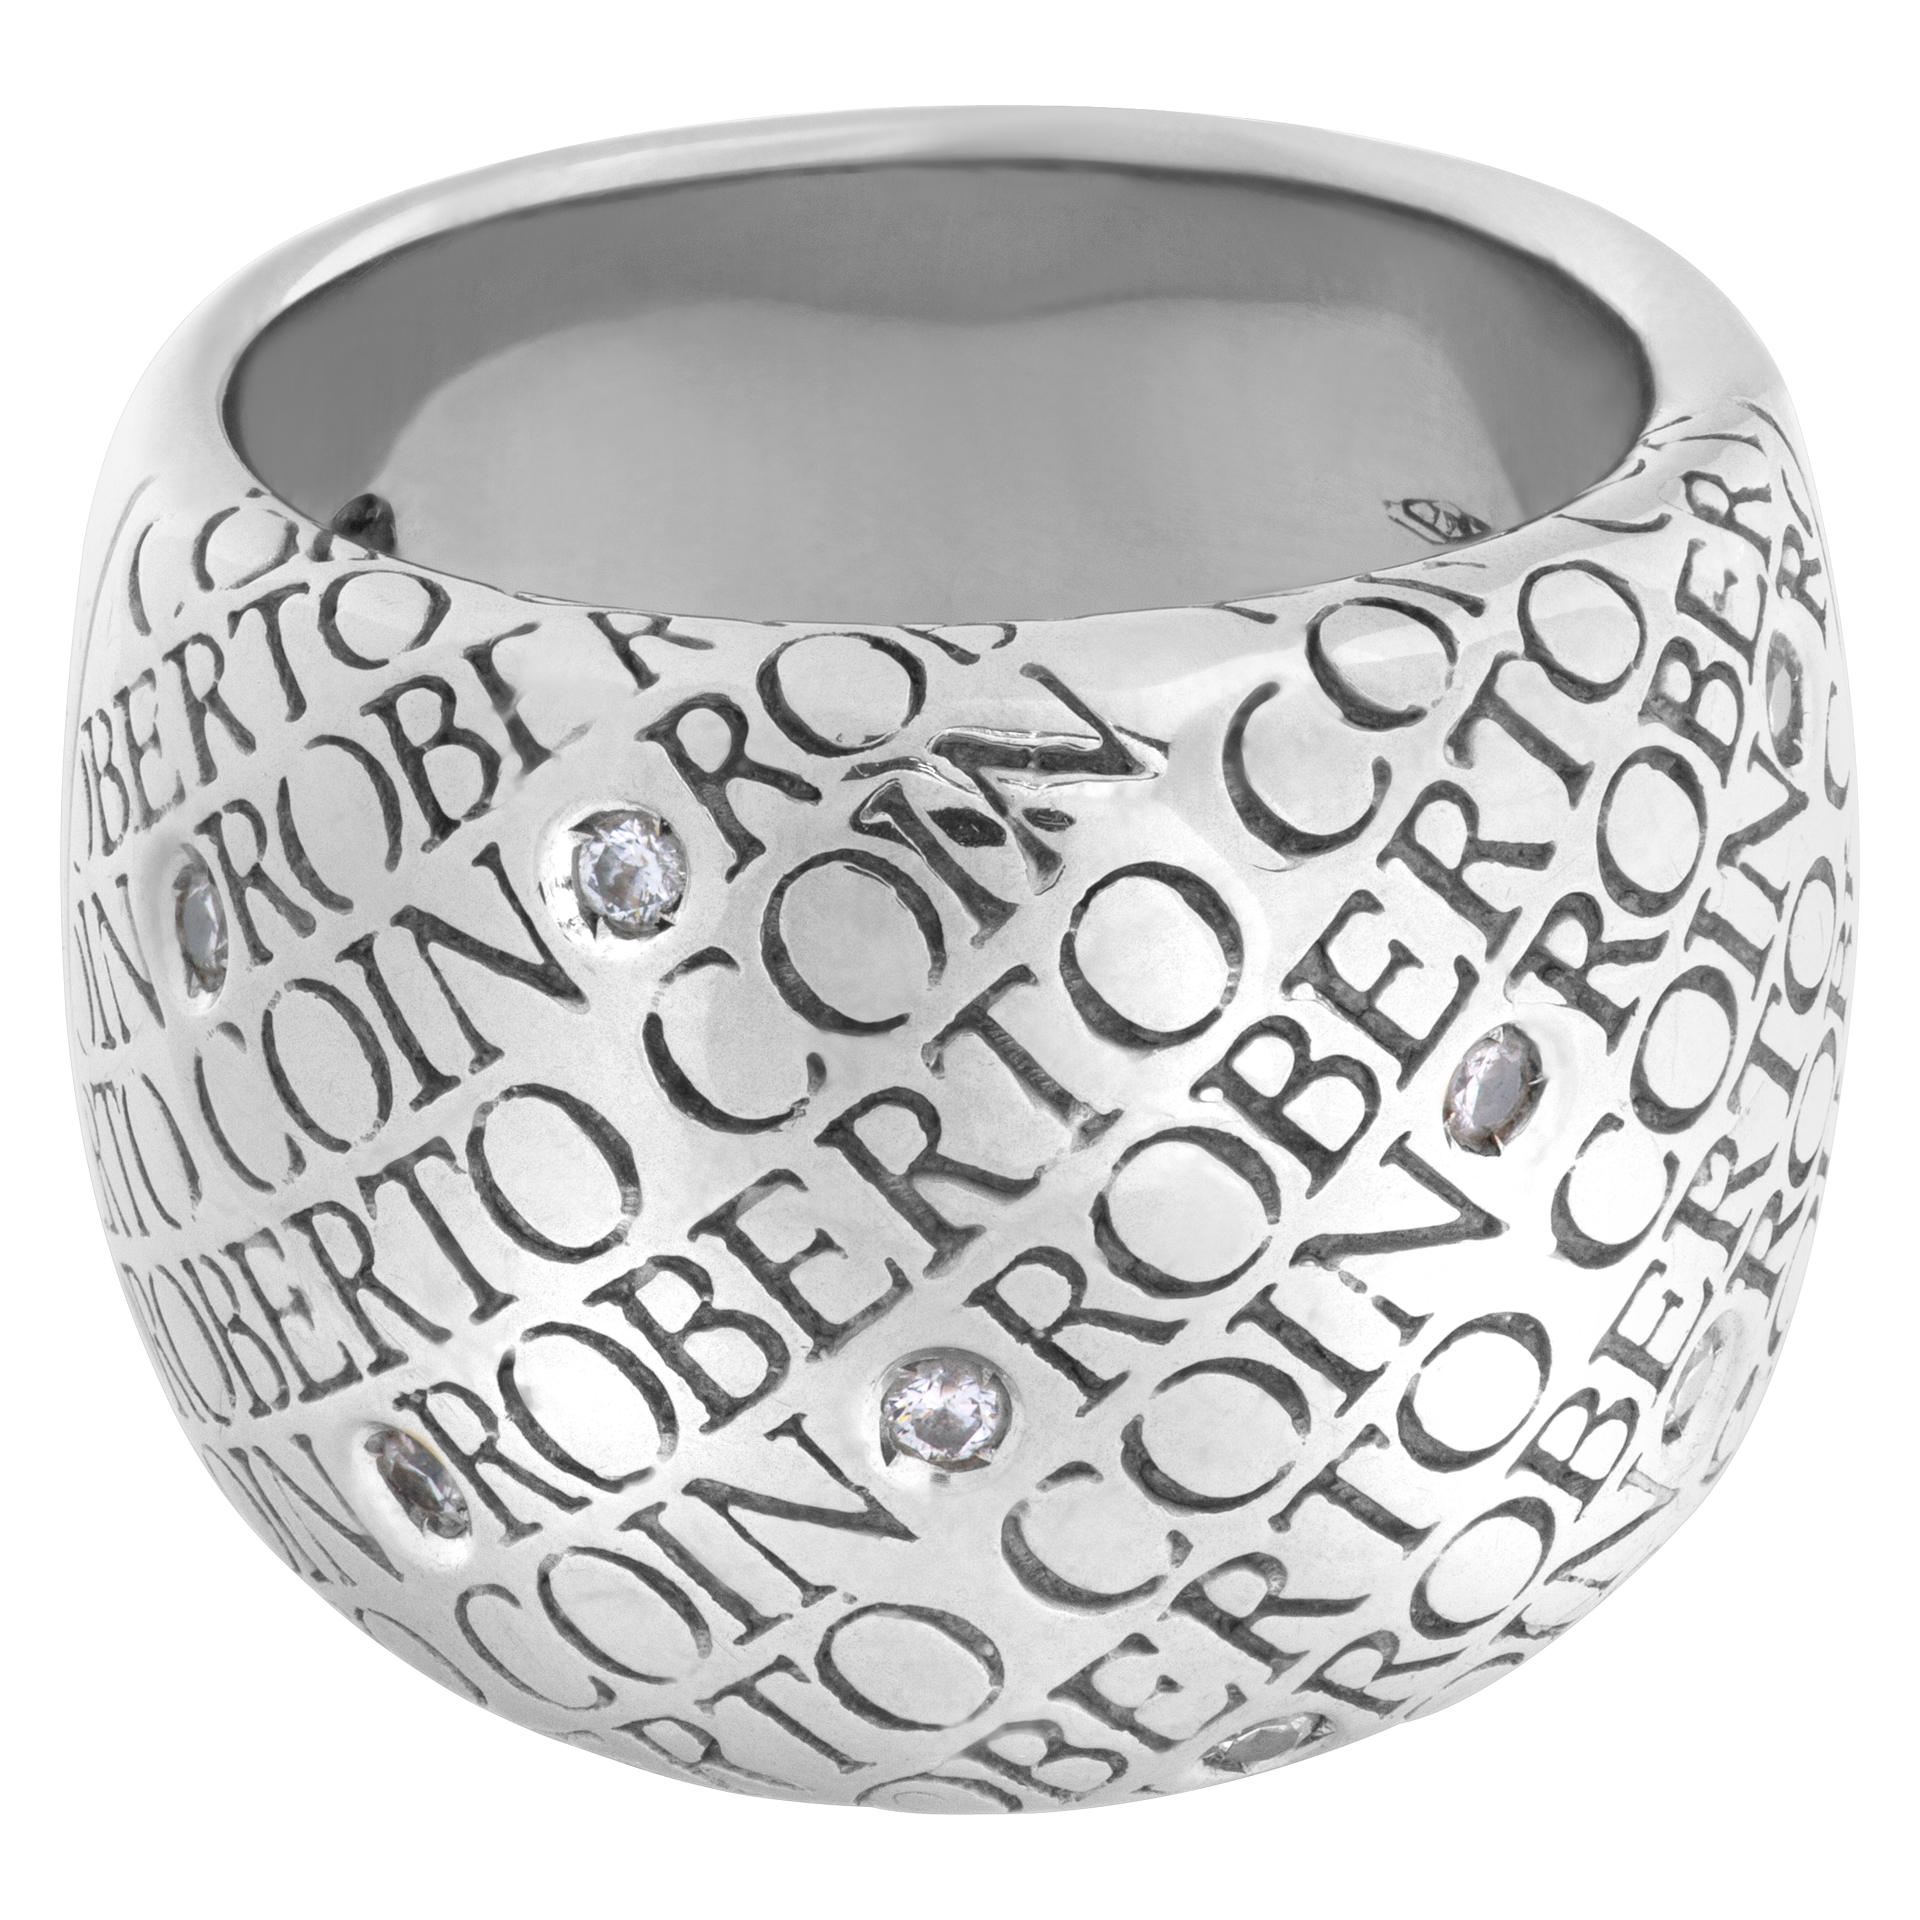 Roberto Coin ring in 18k white gold with 9 diamonds